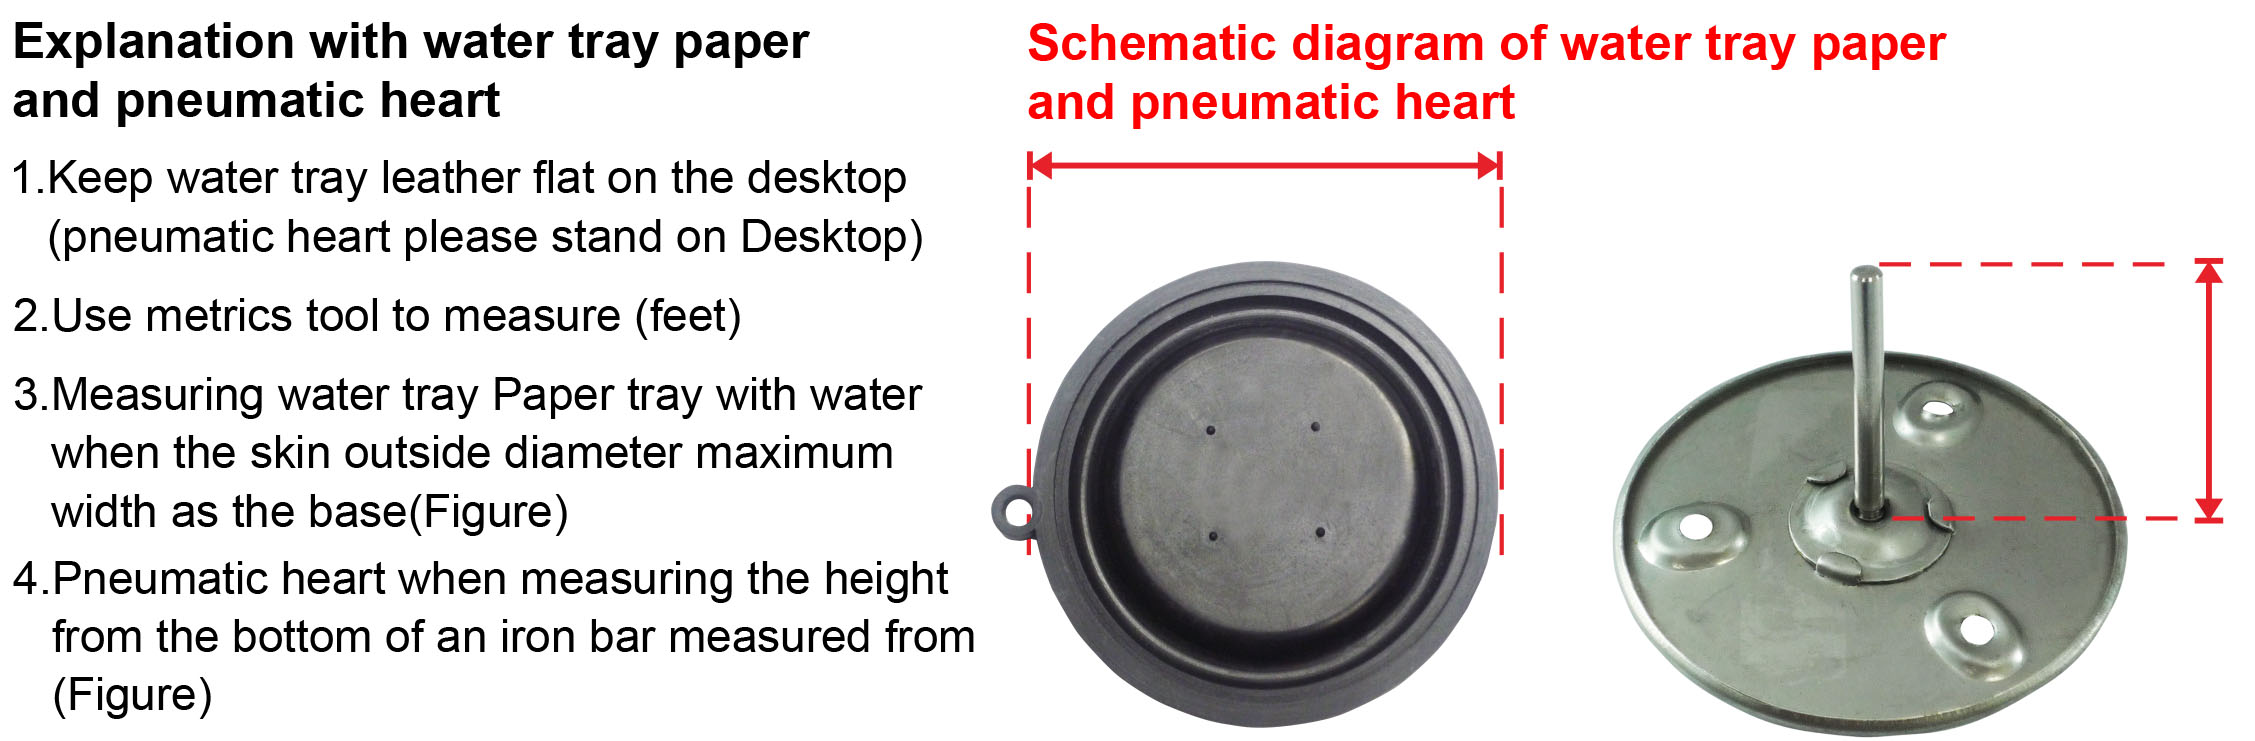 Water dish with a pneumatic heart - plastic